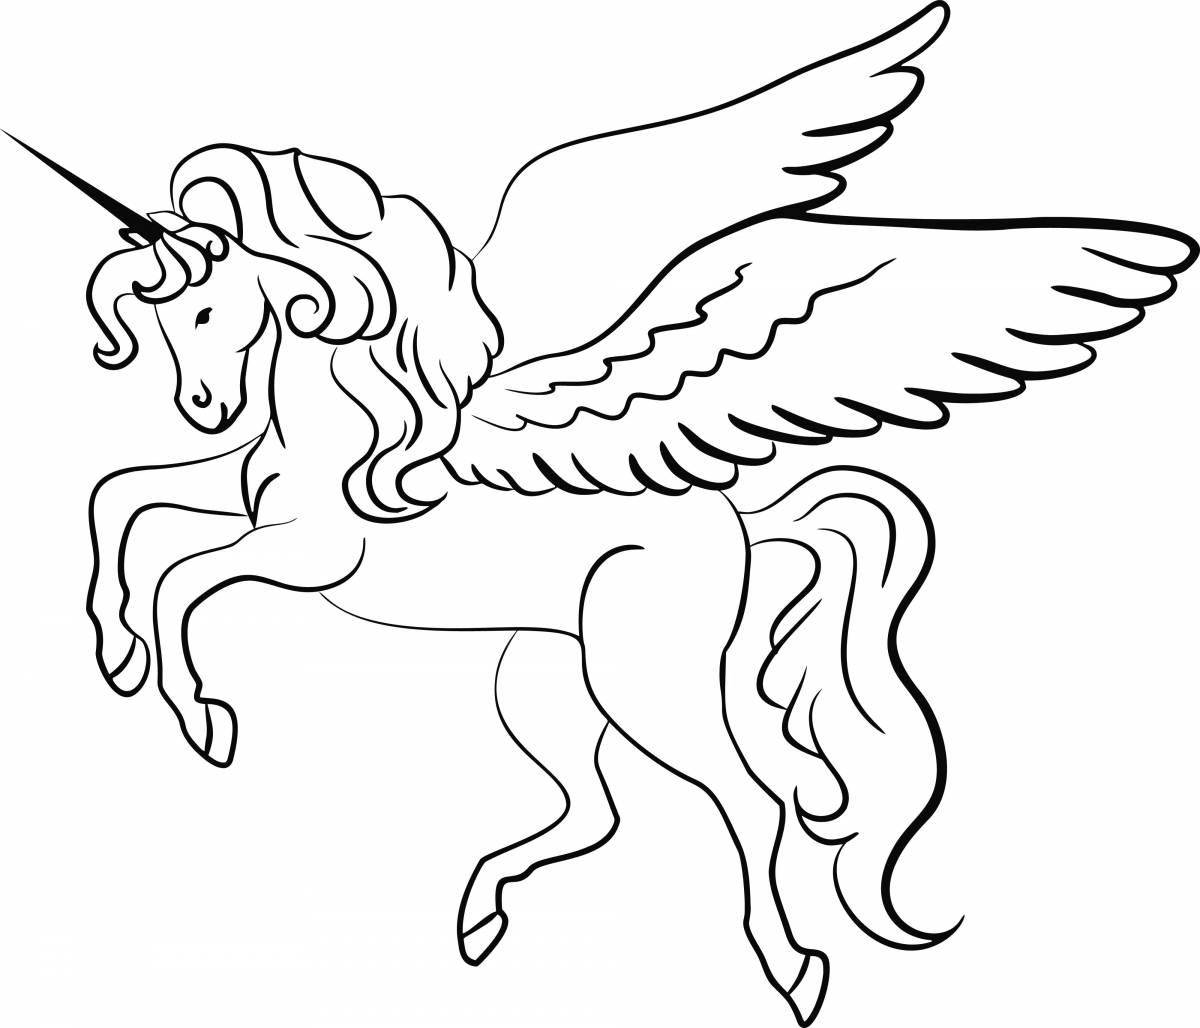 Awesome alicorn coloring book